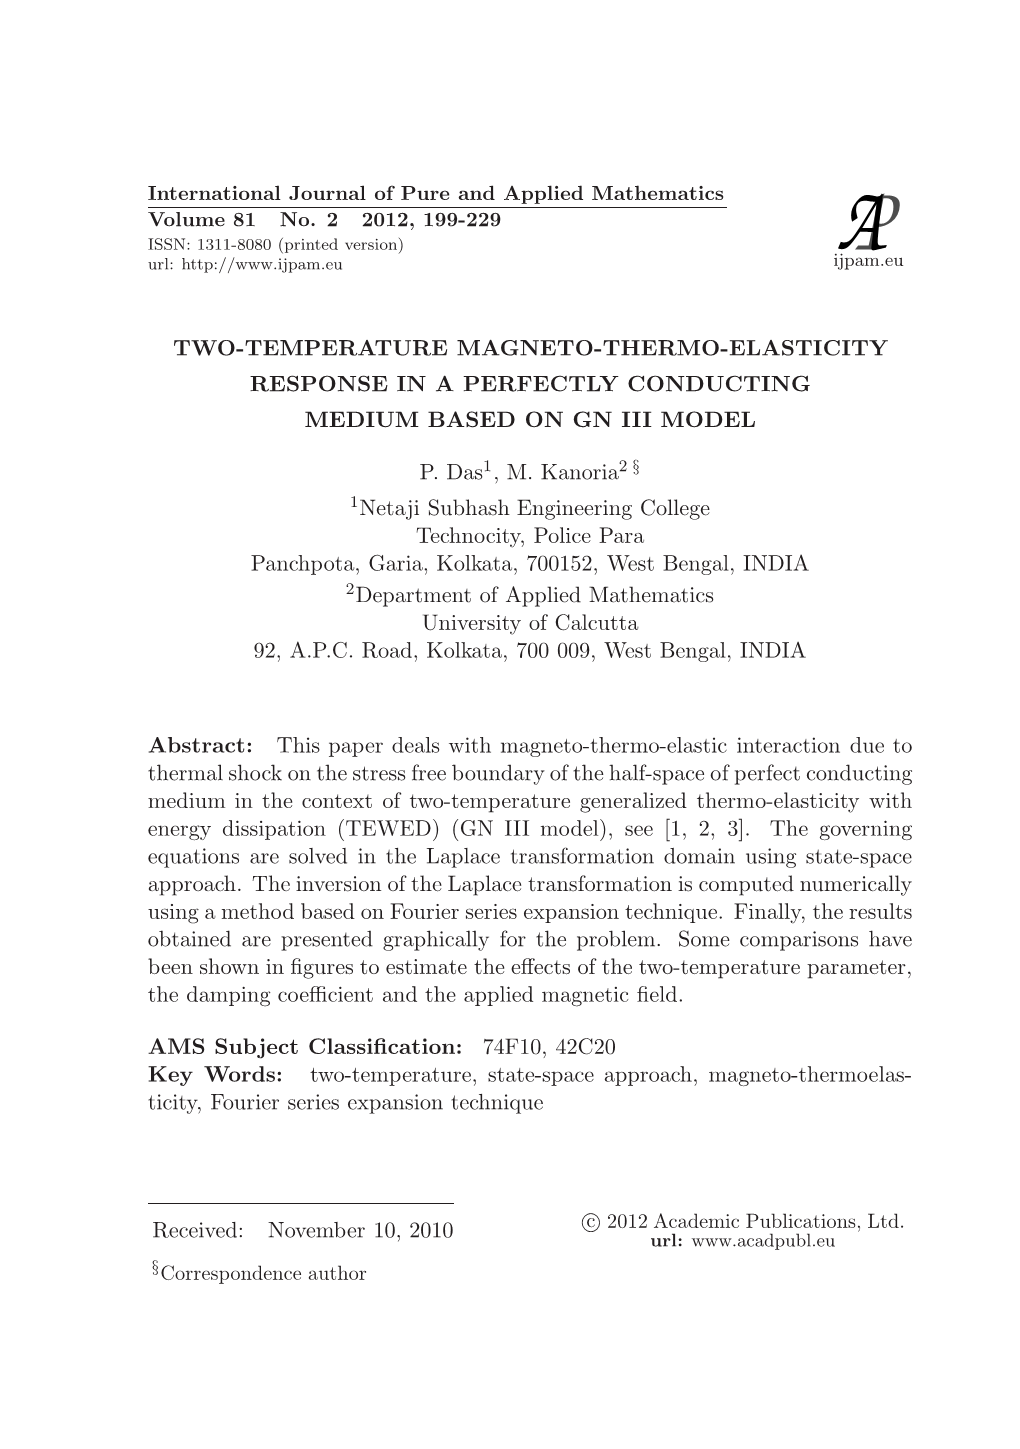 Two-Temperature Magneto-Thermo-Elasticity Response in a Perfectly Conducting Medium Based on Gn Iii Model